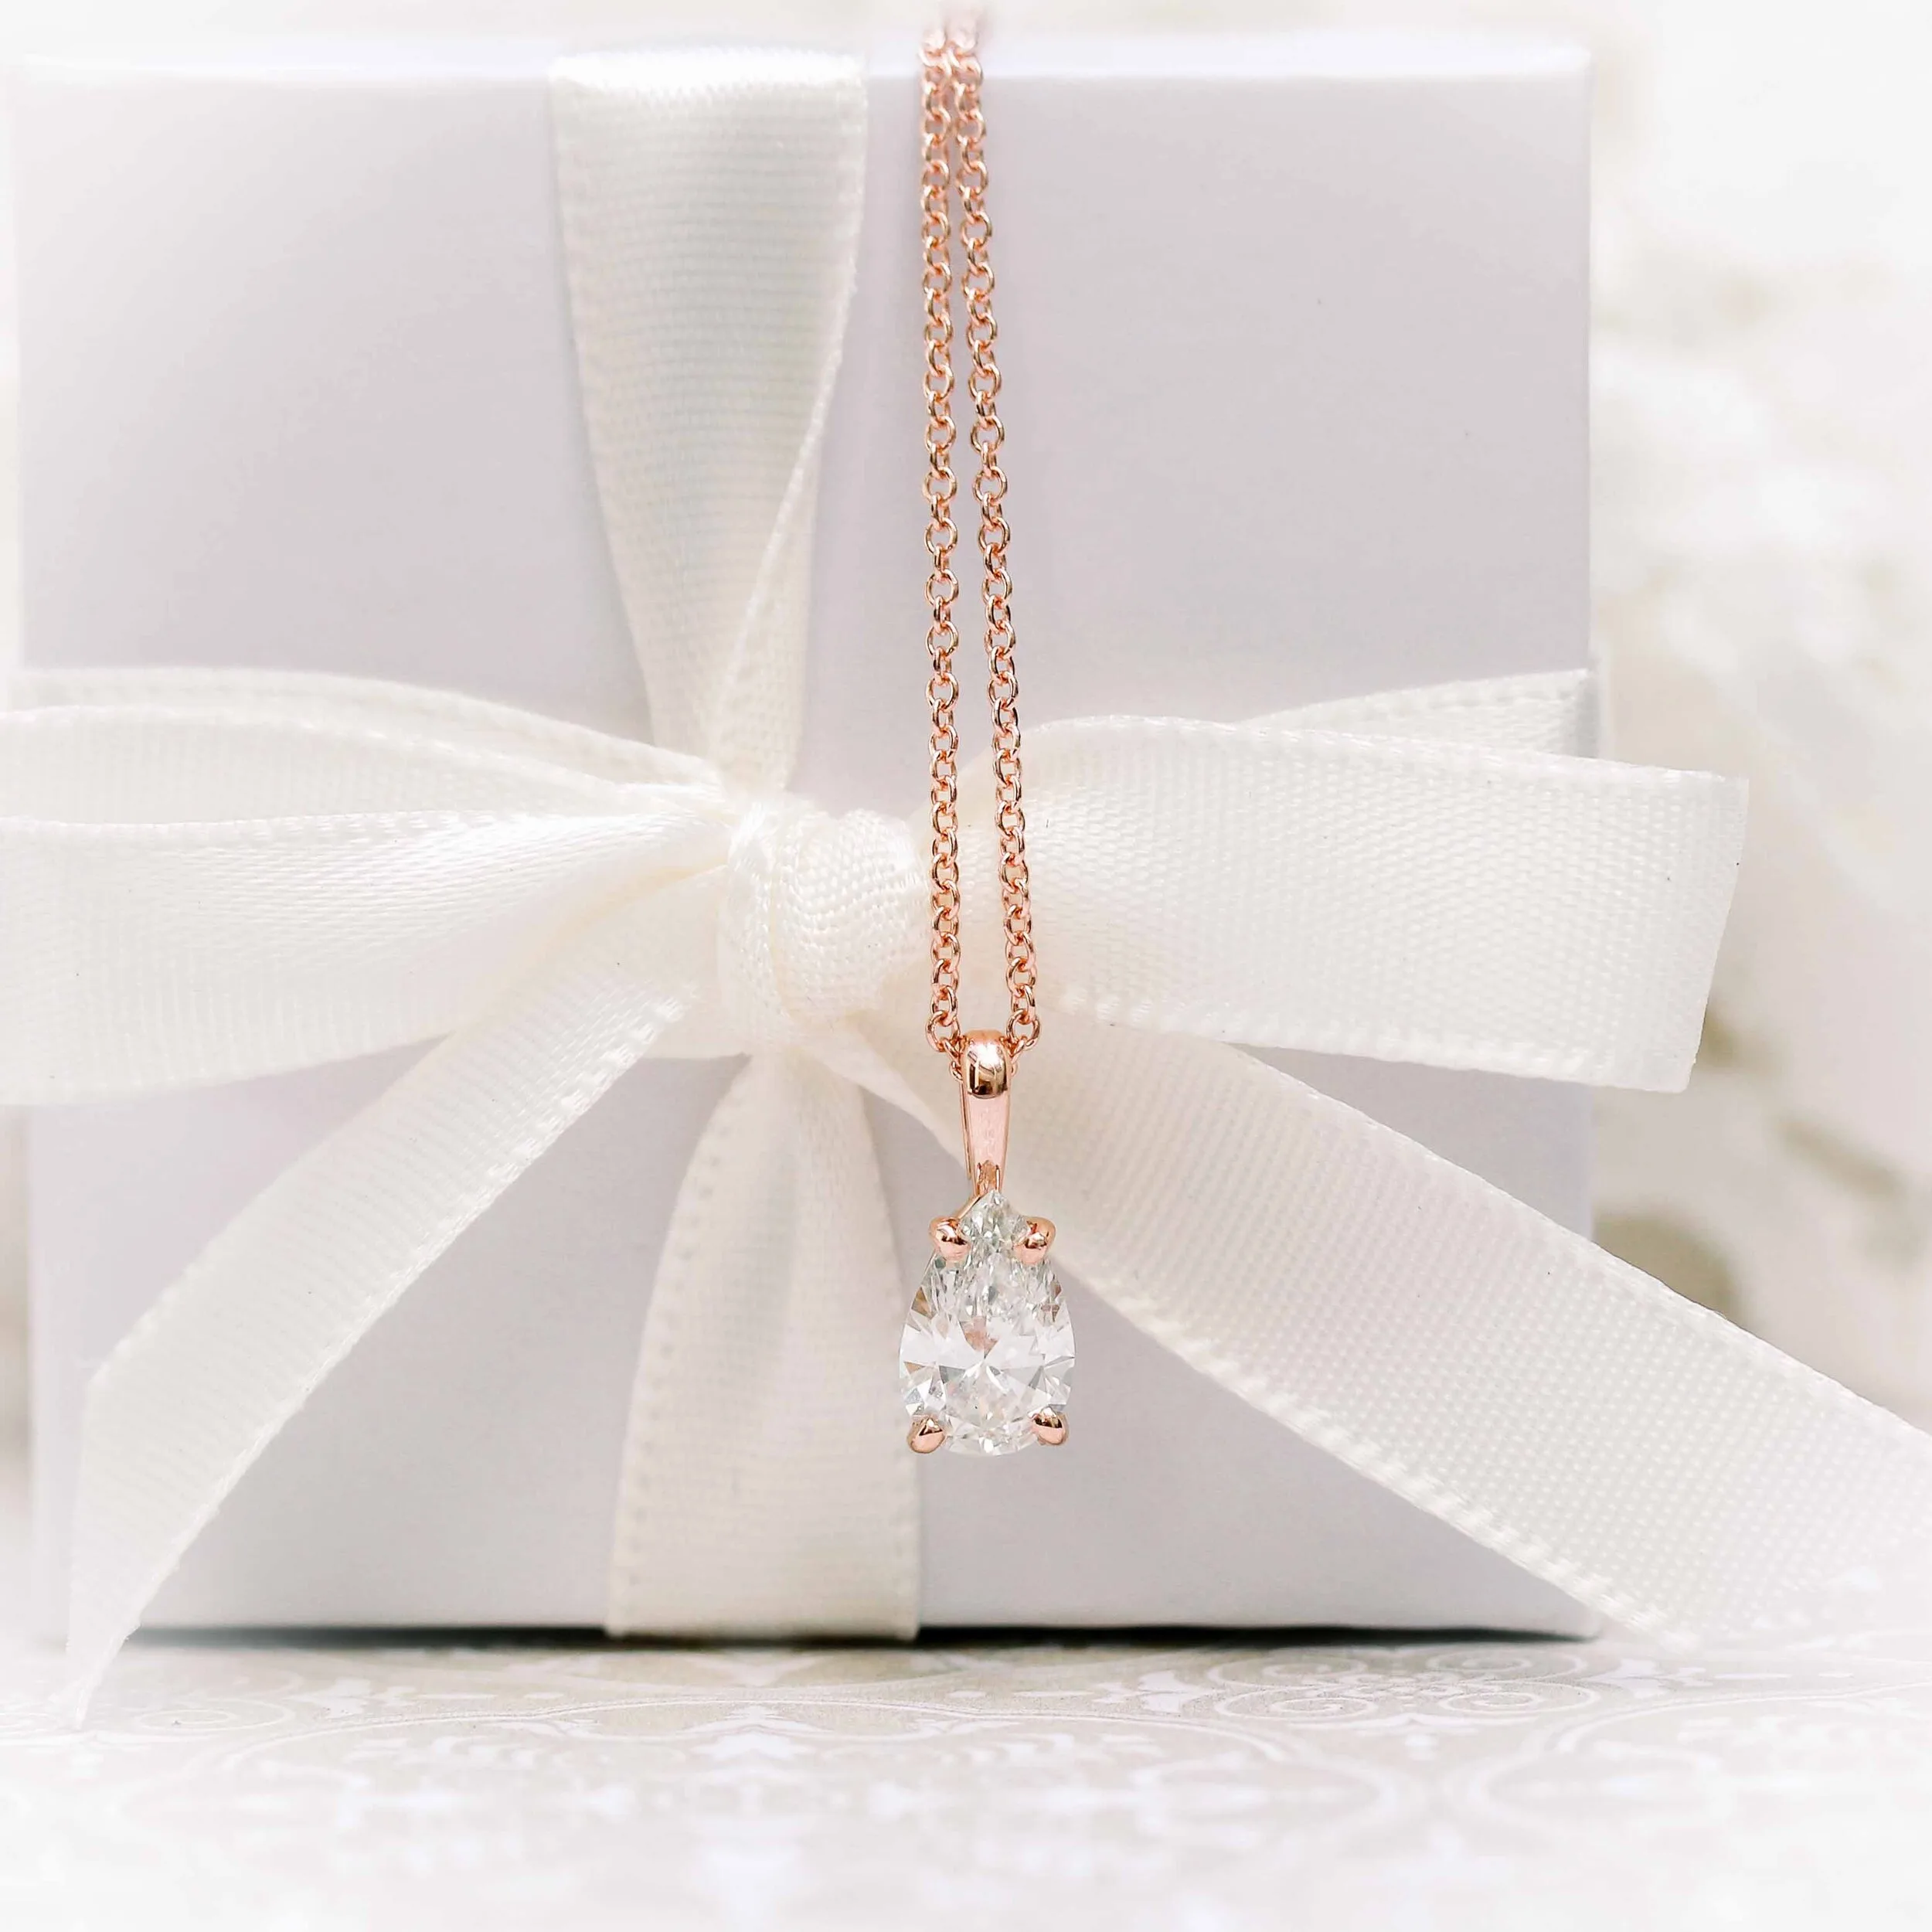 Hand Selected 0.7 Carat Lab Diamonds Pear Diamond Solitaire Pendant in 14k Rose Gold (Main View)